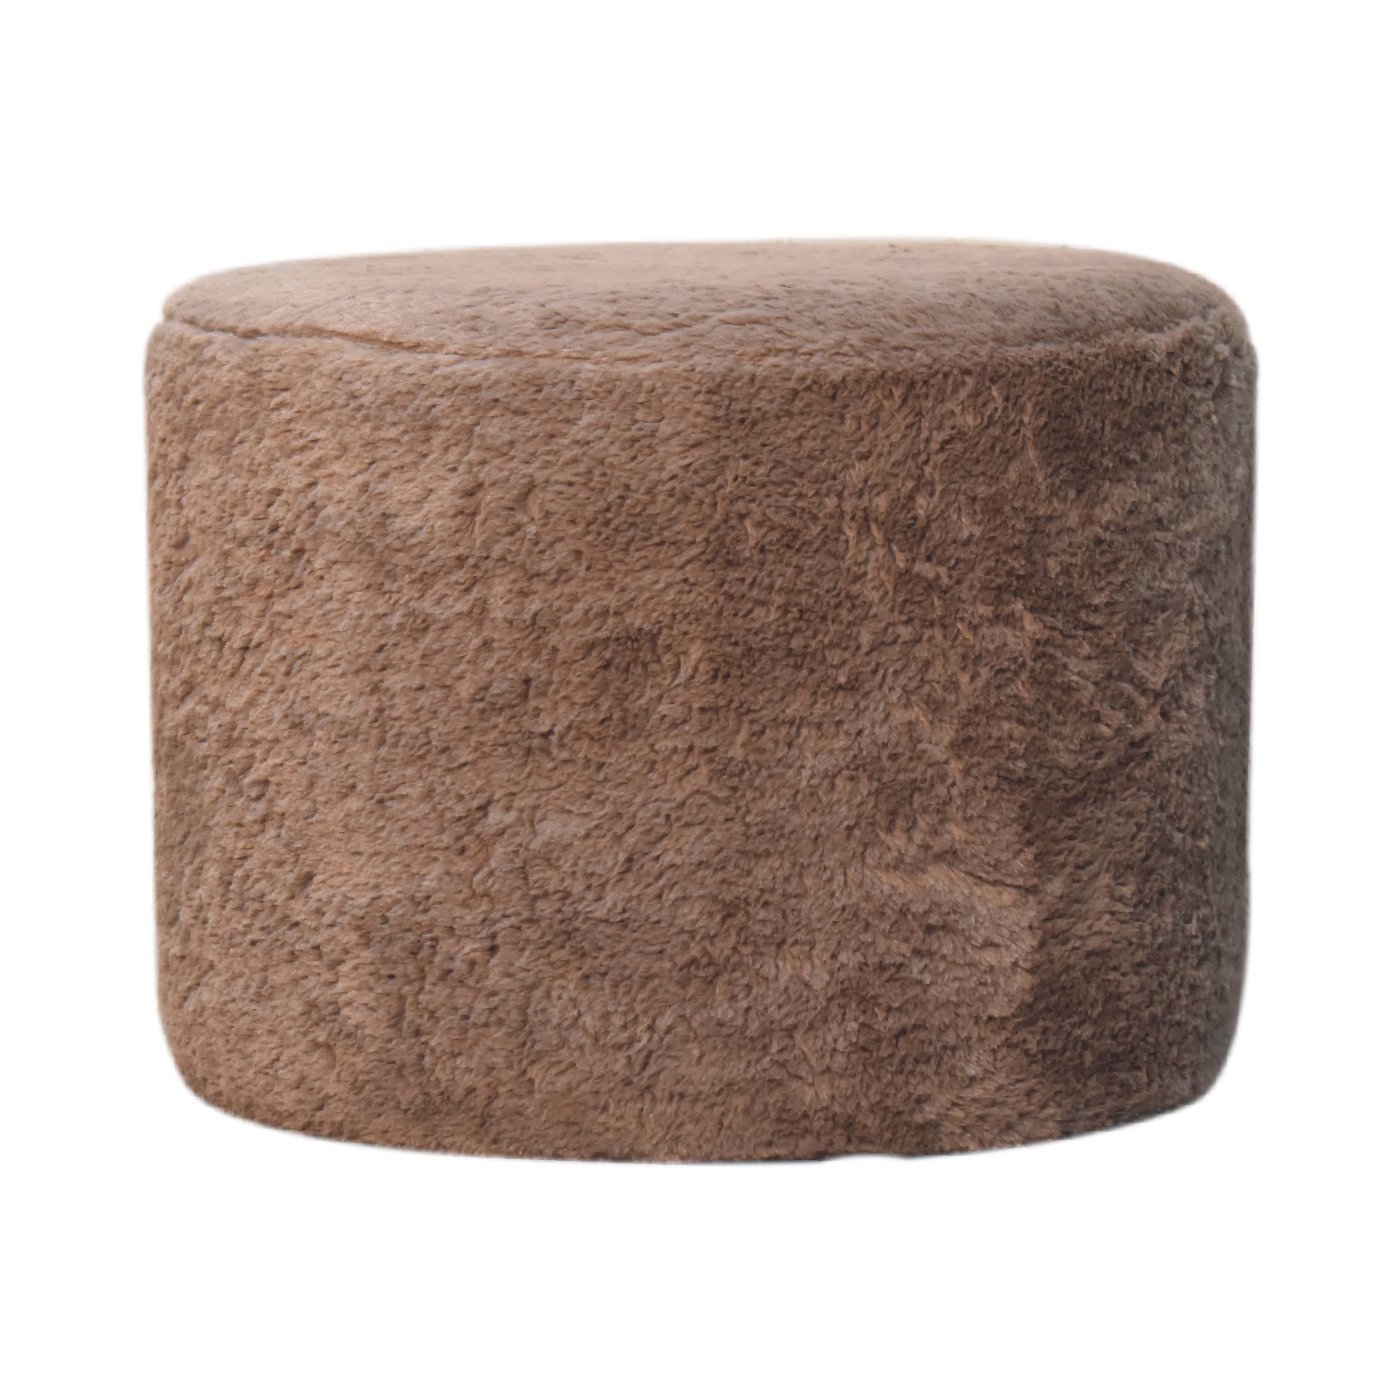 View Mocha Faux Fur Round Footstool information